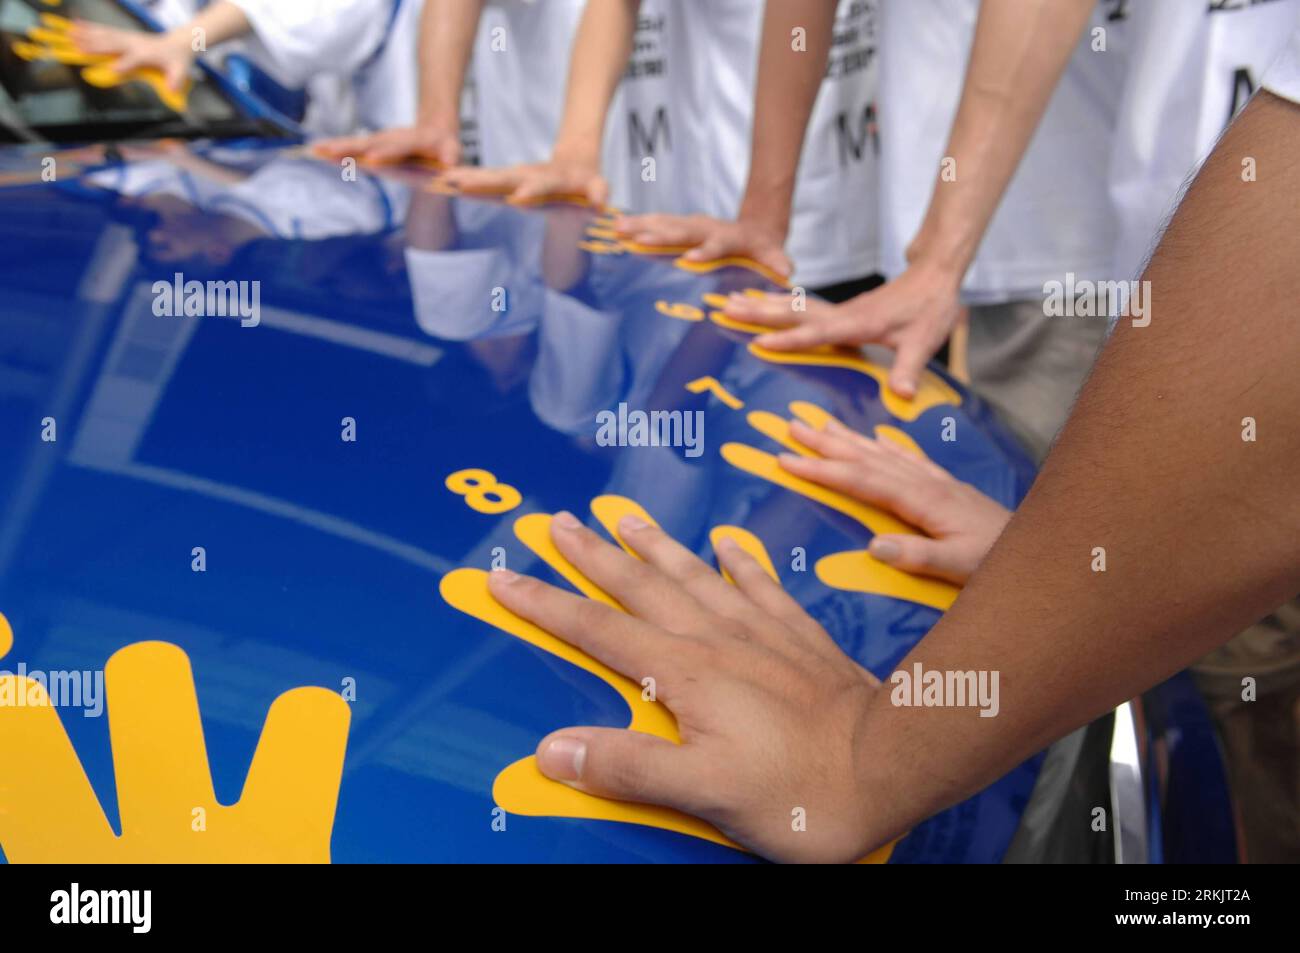 Bildnummer: 56161335  Datum: 09.10.2011  Copyright: imago/Xinhua (111009) -- MACAO, Oct. 9, 2011 (Xinhua) -- Competitors participate in the Subaru Palm Challenge 2011 in Macao, south China, Oct. 9, 2011. Contestants are asked to follow some instructions while sticking their right hands to a car for six hours. (Xinhua/Cheong Kam Ka)(cyl) CHINA-MACAO-SUBARU PALM CHALLENGE 2011 (CN) PUBLICATIONxNOTxINxCHN Gesellschaft Wettkampf kurios Auto berühren x0x xtm 2011 quer      56161335 Date 09 10 2011 Copyright Imago XINHUA  Macao OCT 9 2011 XINHUA Competitors participate in The Subaru Palm Challenge 2 Stock Photo